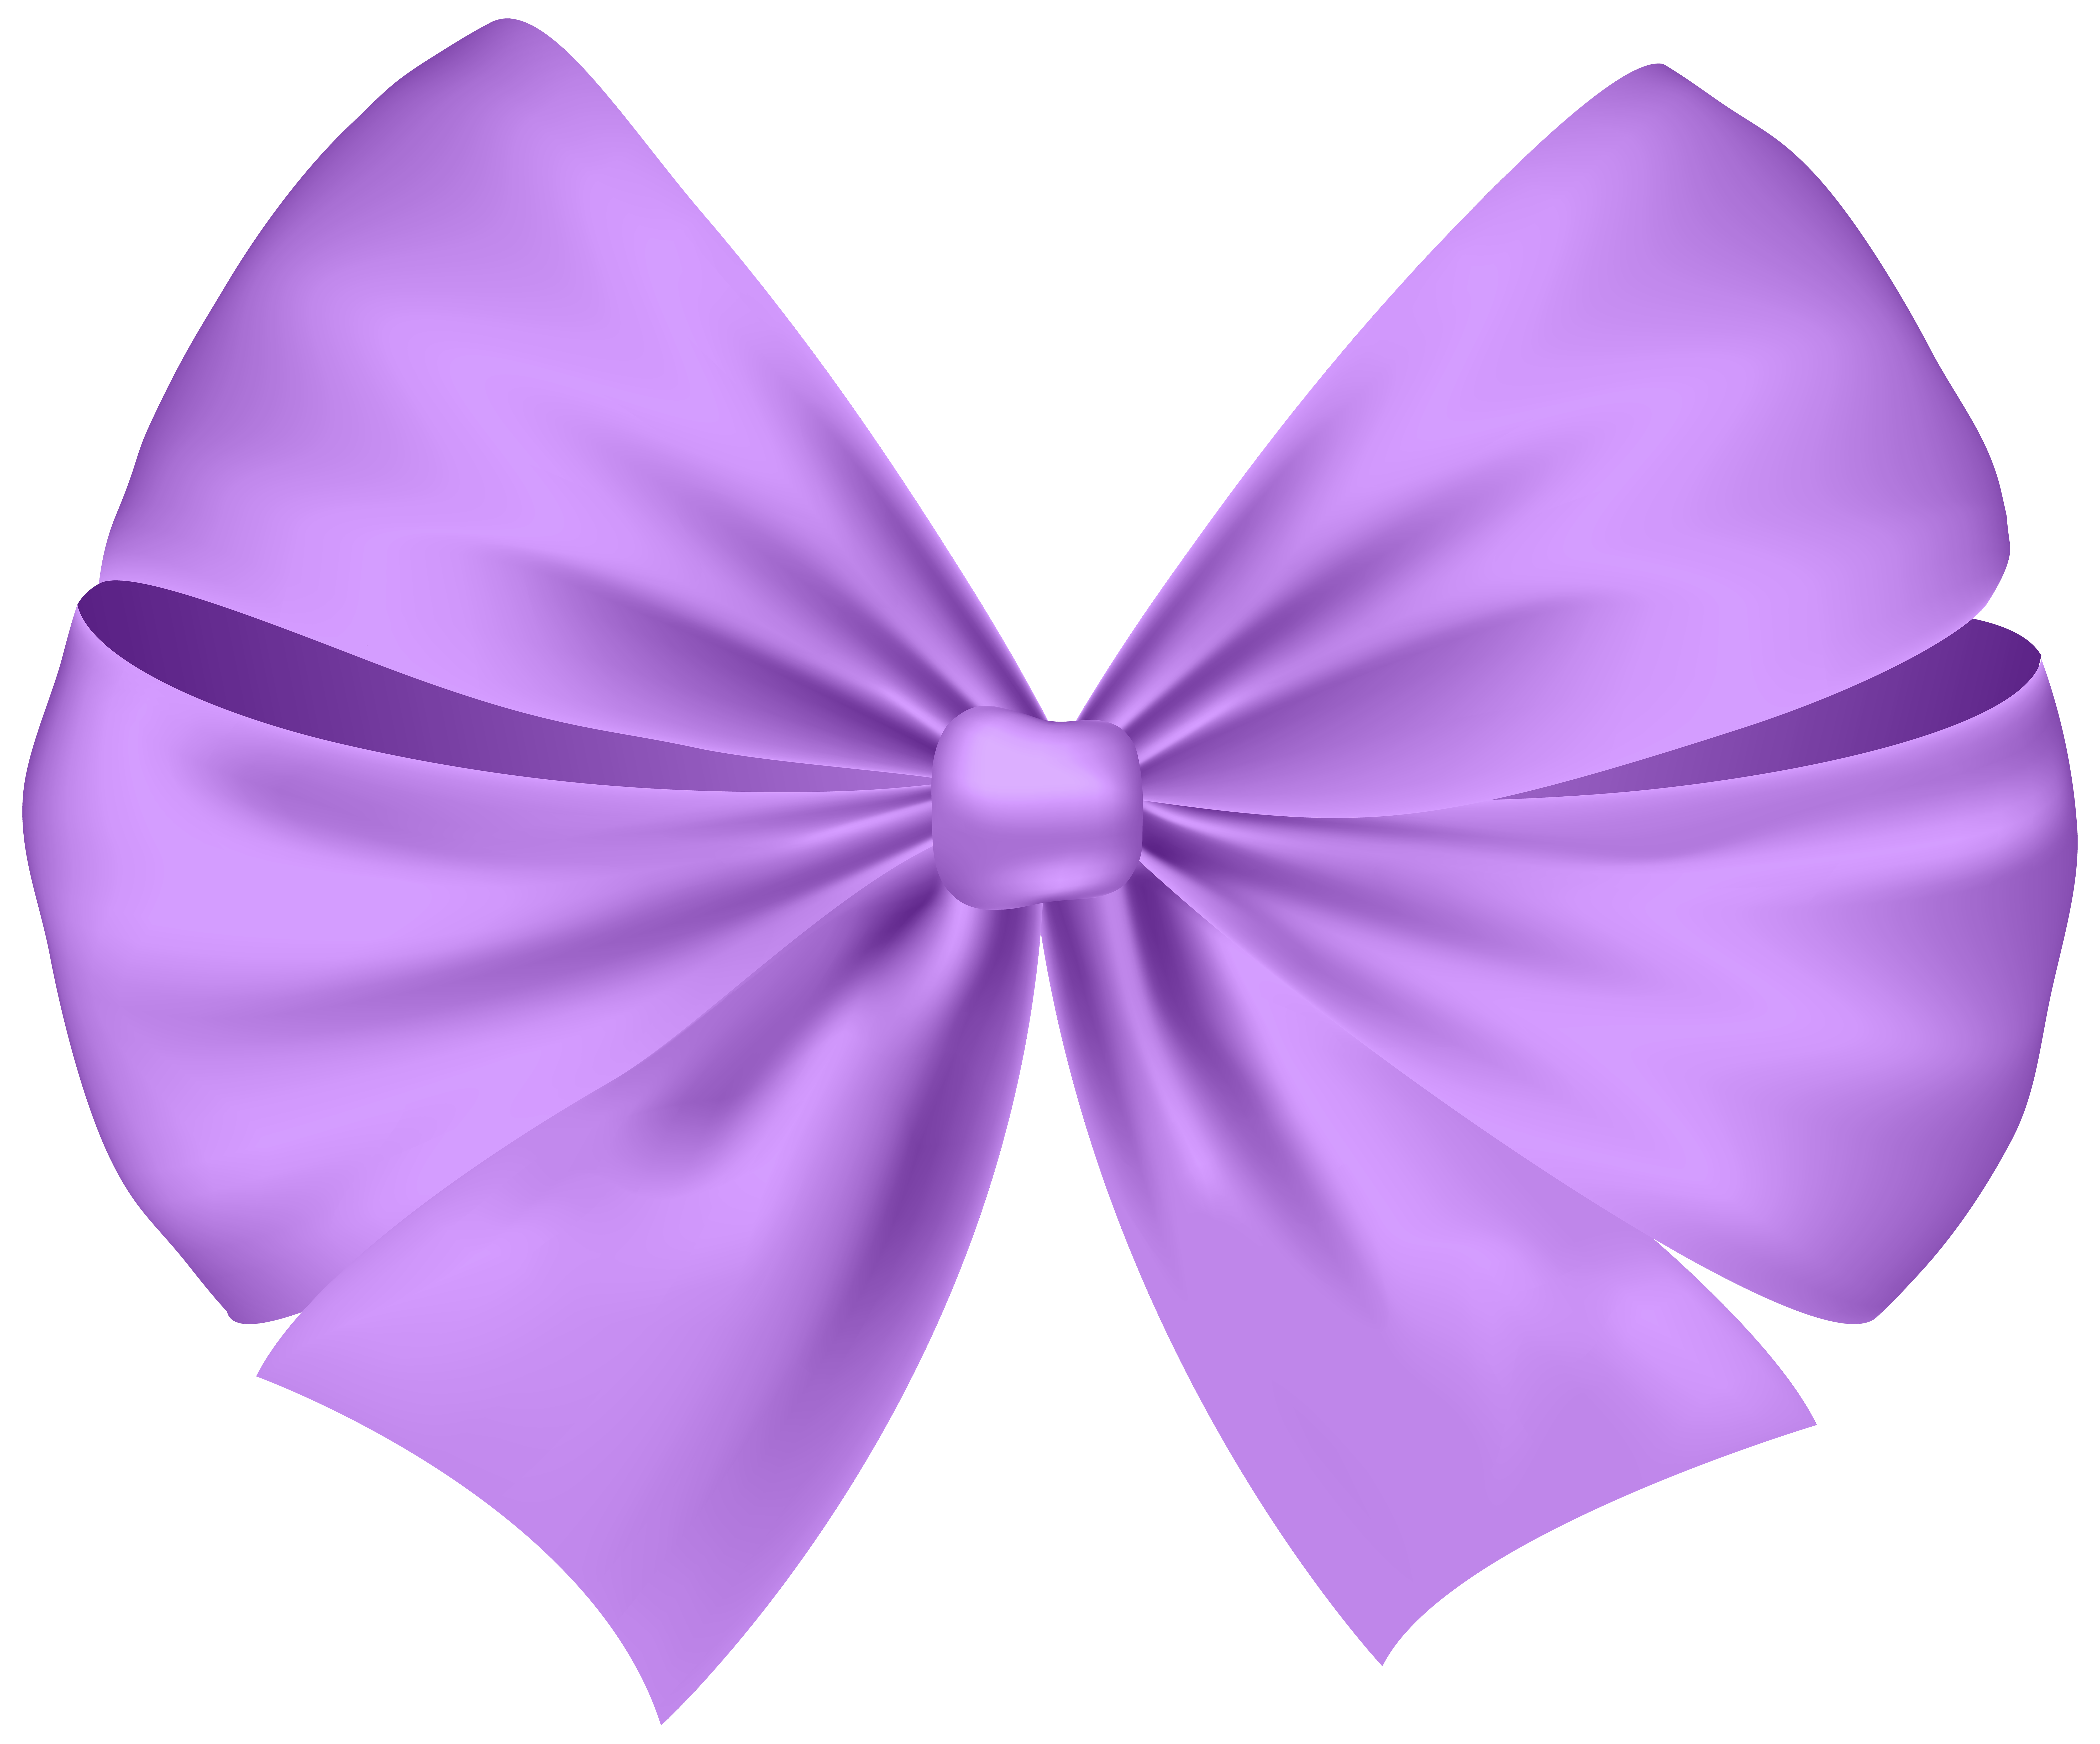 Pink Bow Transparent PNG Clipart​  Gallery Yopriceville - High-Quality  Free Images and Transparent PNG Clipart